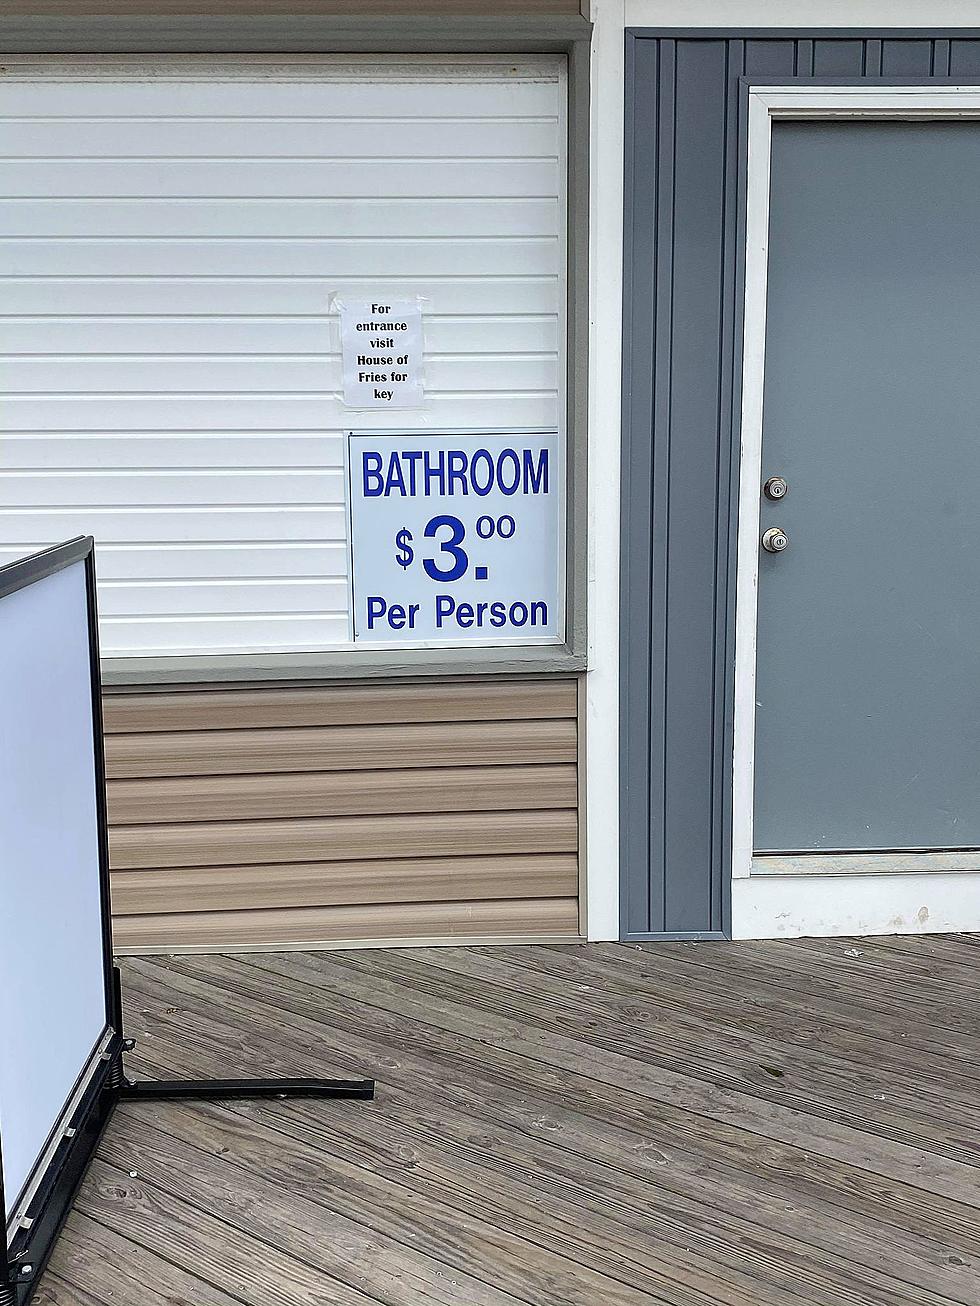 Do You Agree? Paying To Use The Bathroom On A Jersey Shore, NJ Boardwalk Is Absurd